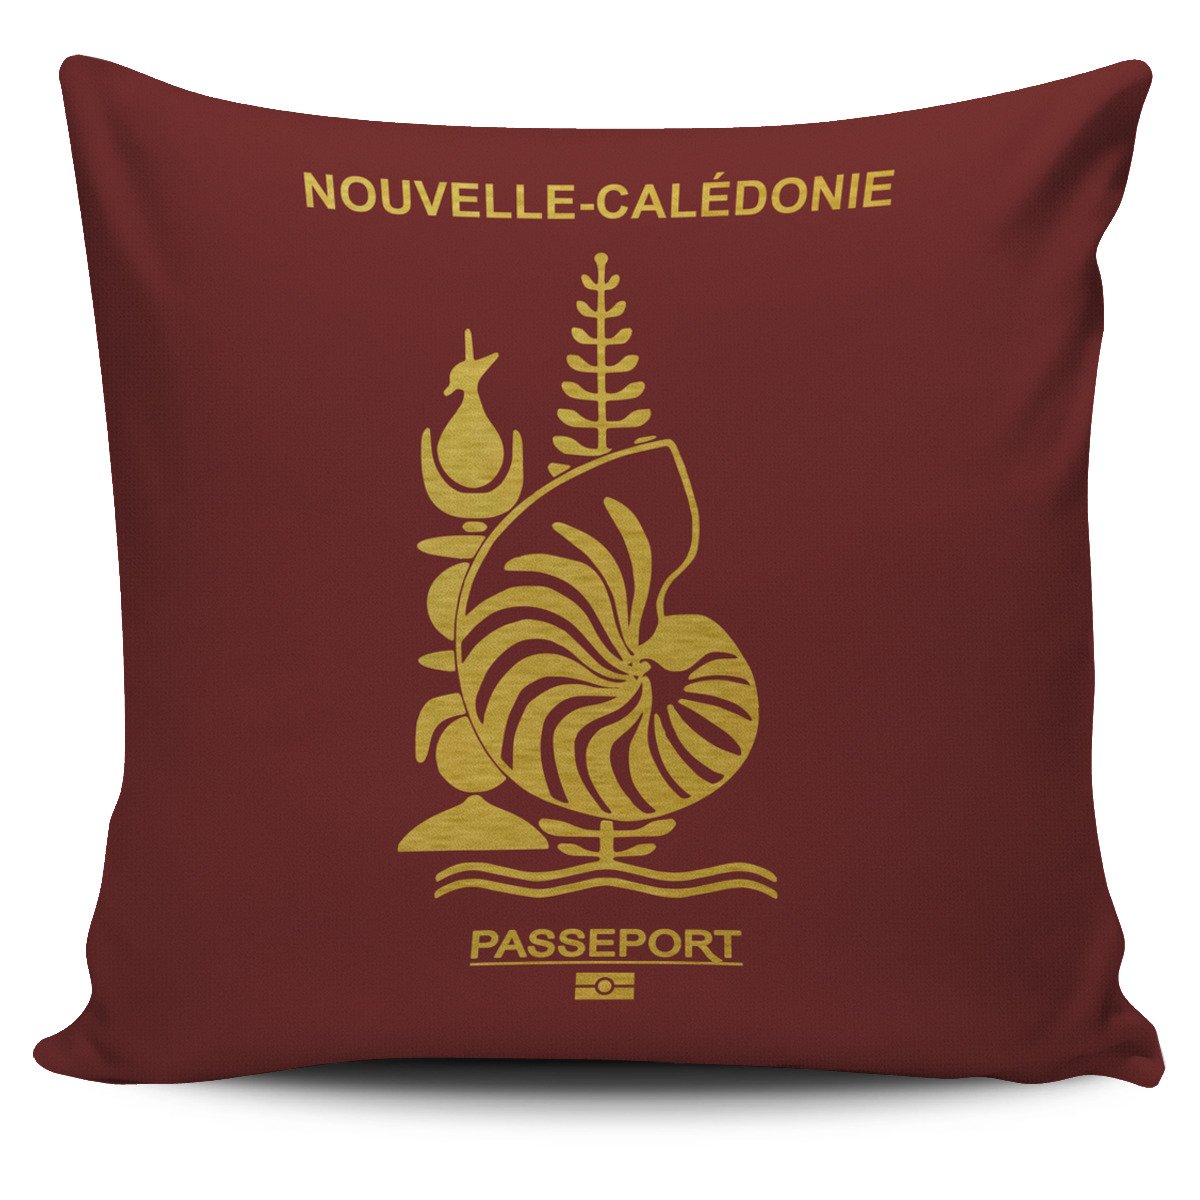 New Caledonia Pillow Cover - Passport Version New Caledonia One size Red - Polynesian Pride